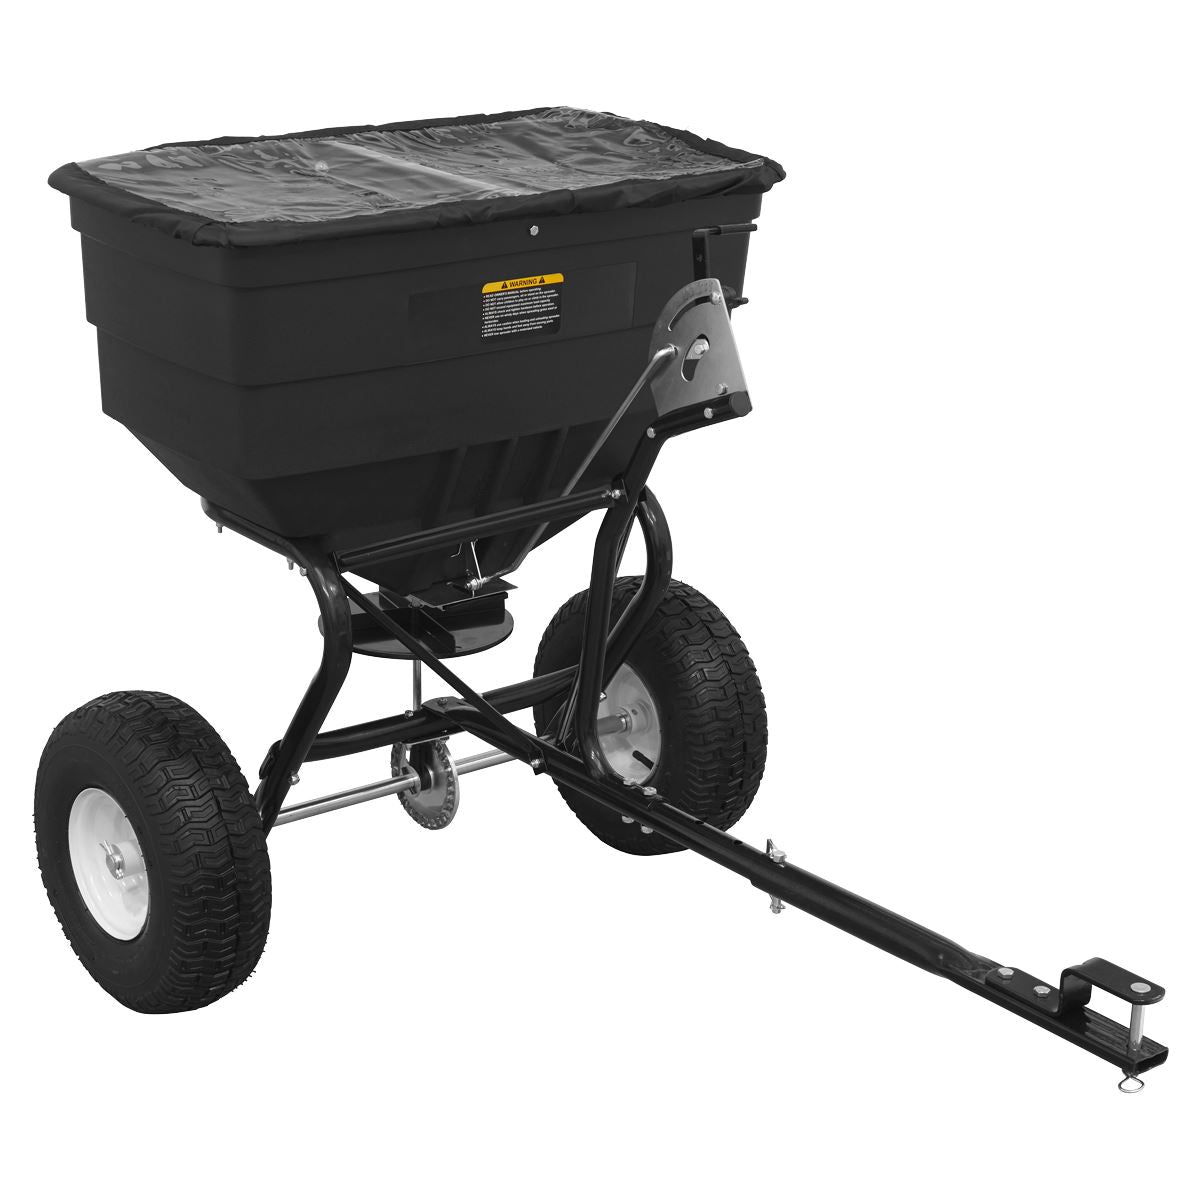 Sealey Broadcast Spreader 80kg Tow Behind SPB80T